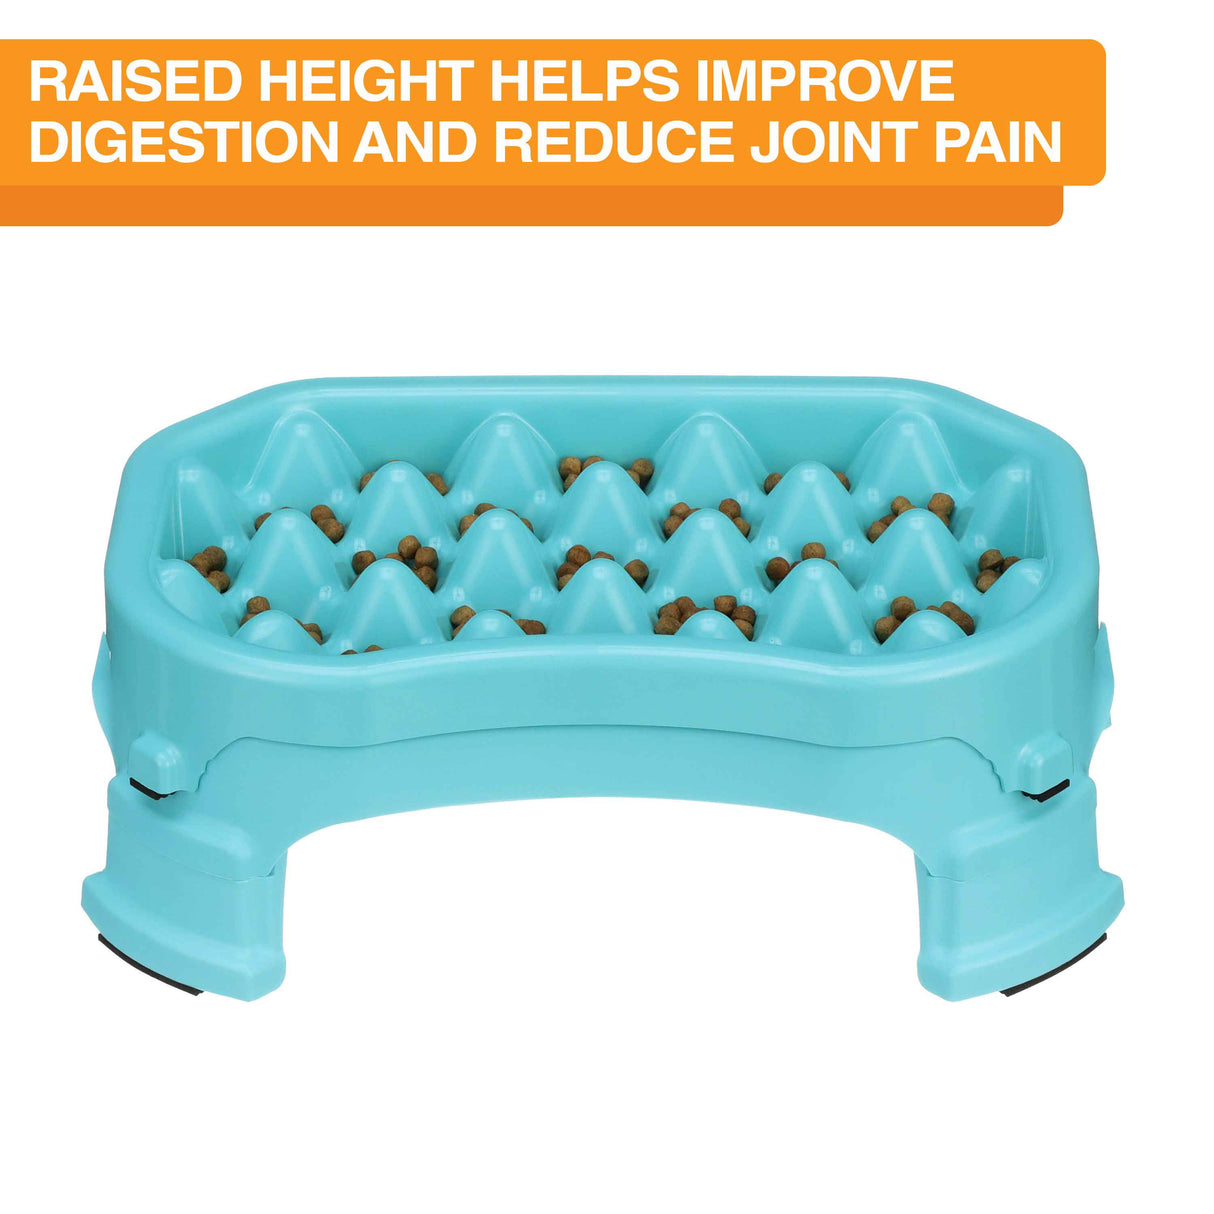 Raised Neater Slow Feeder helps improve digestion and reduces joint pain